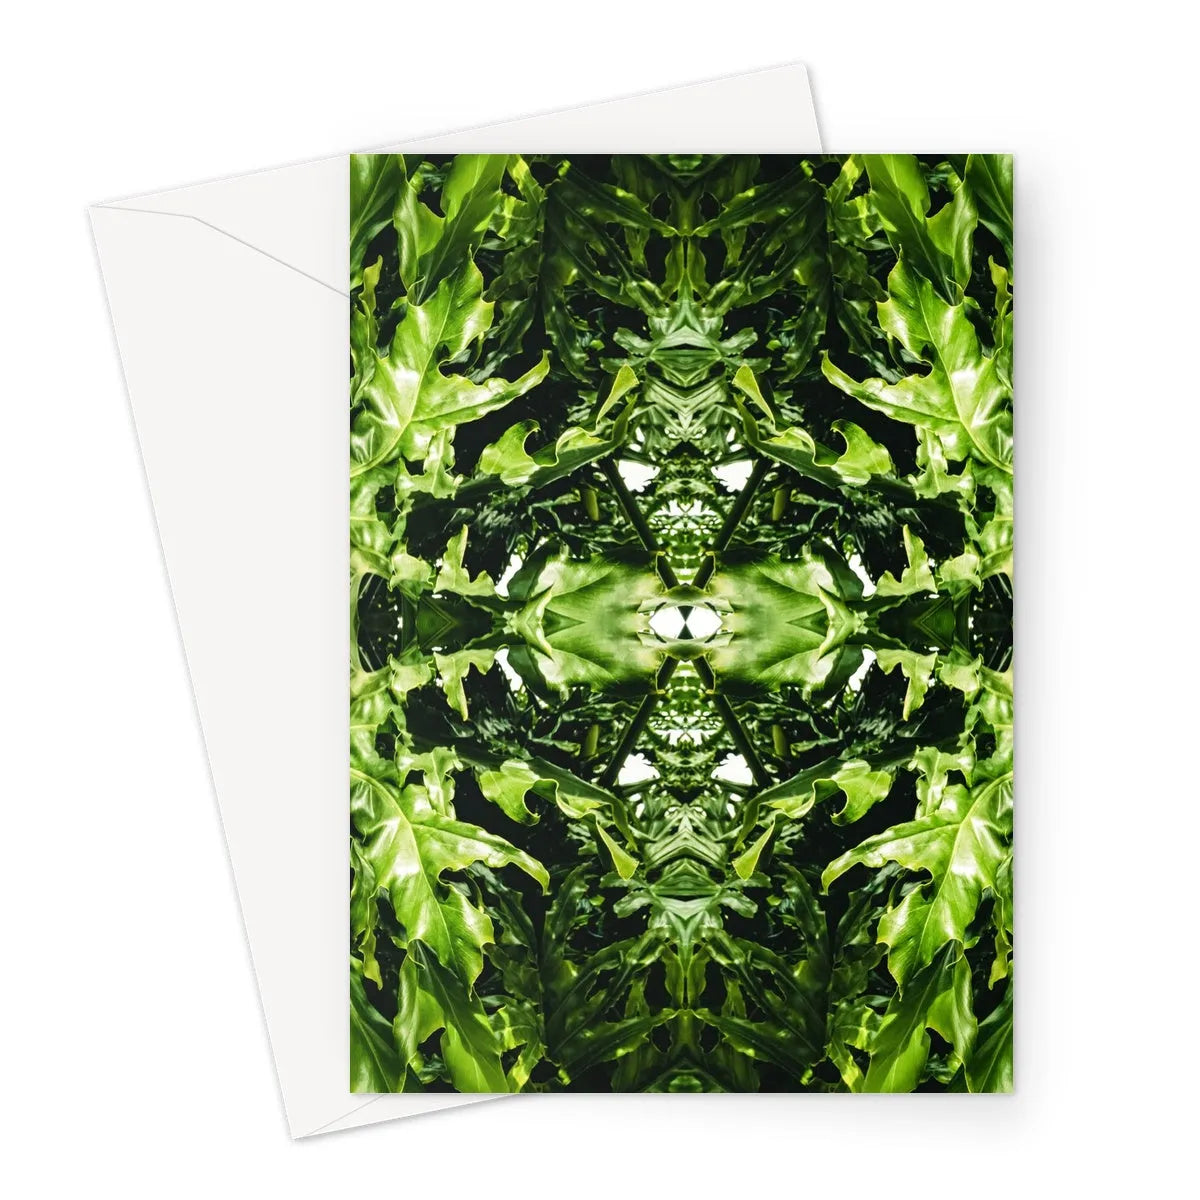 Reach Out Greeting Card - Greeting & Note Cards - Aesthetic Art